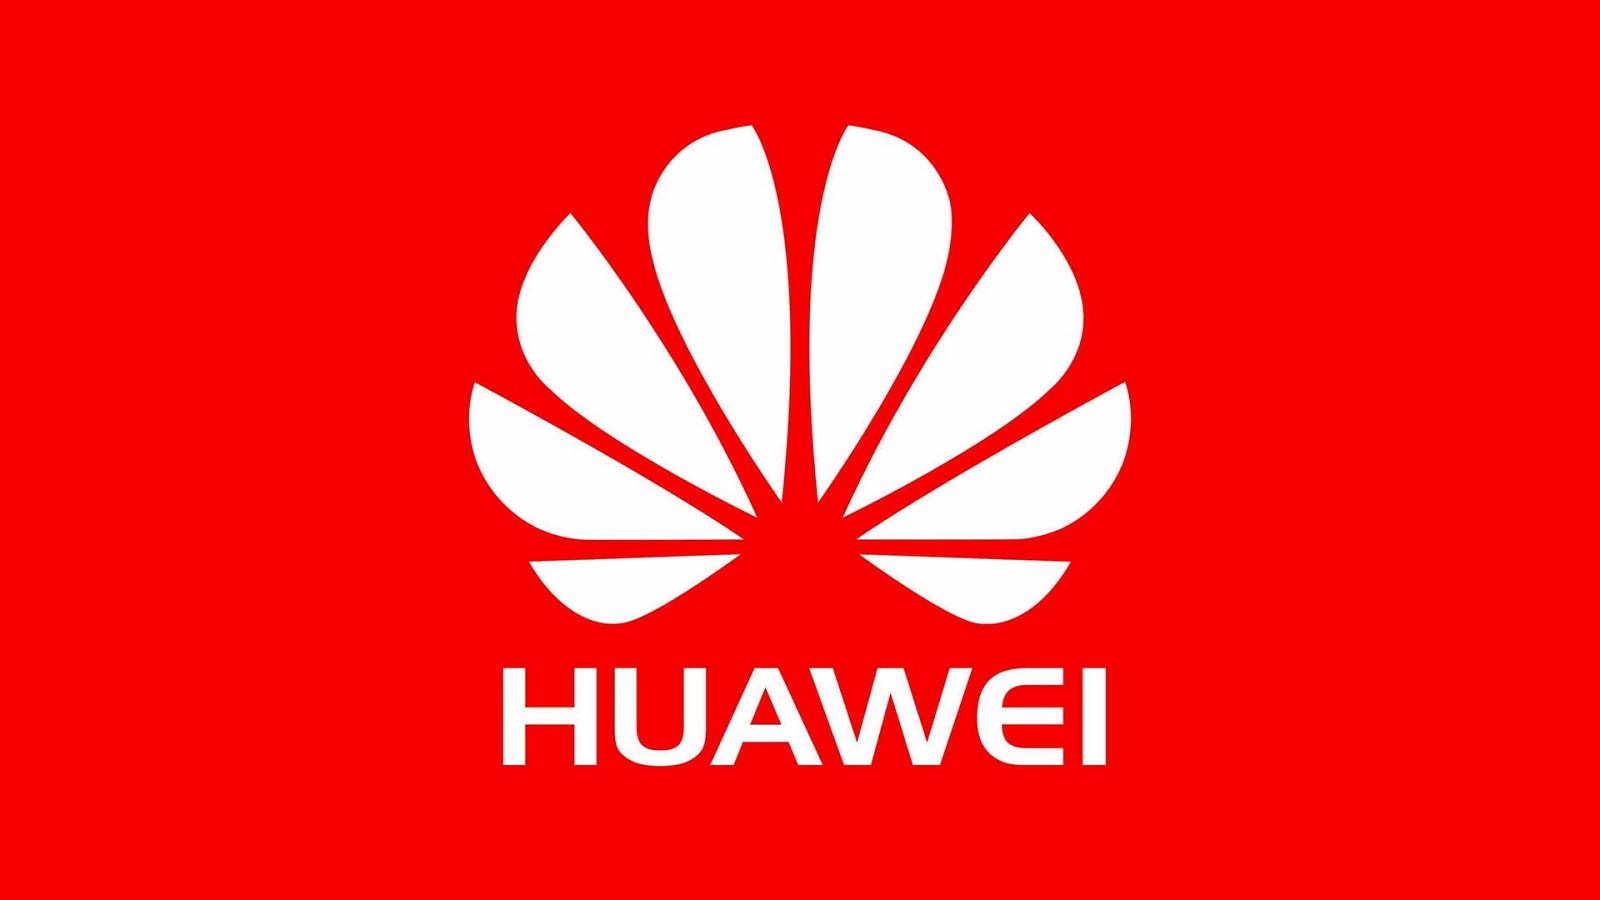 Huawei CHALLENGES THE USA The announcement shows the strength of the company